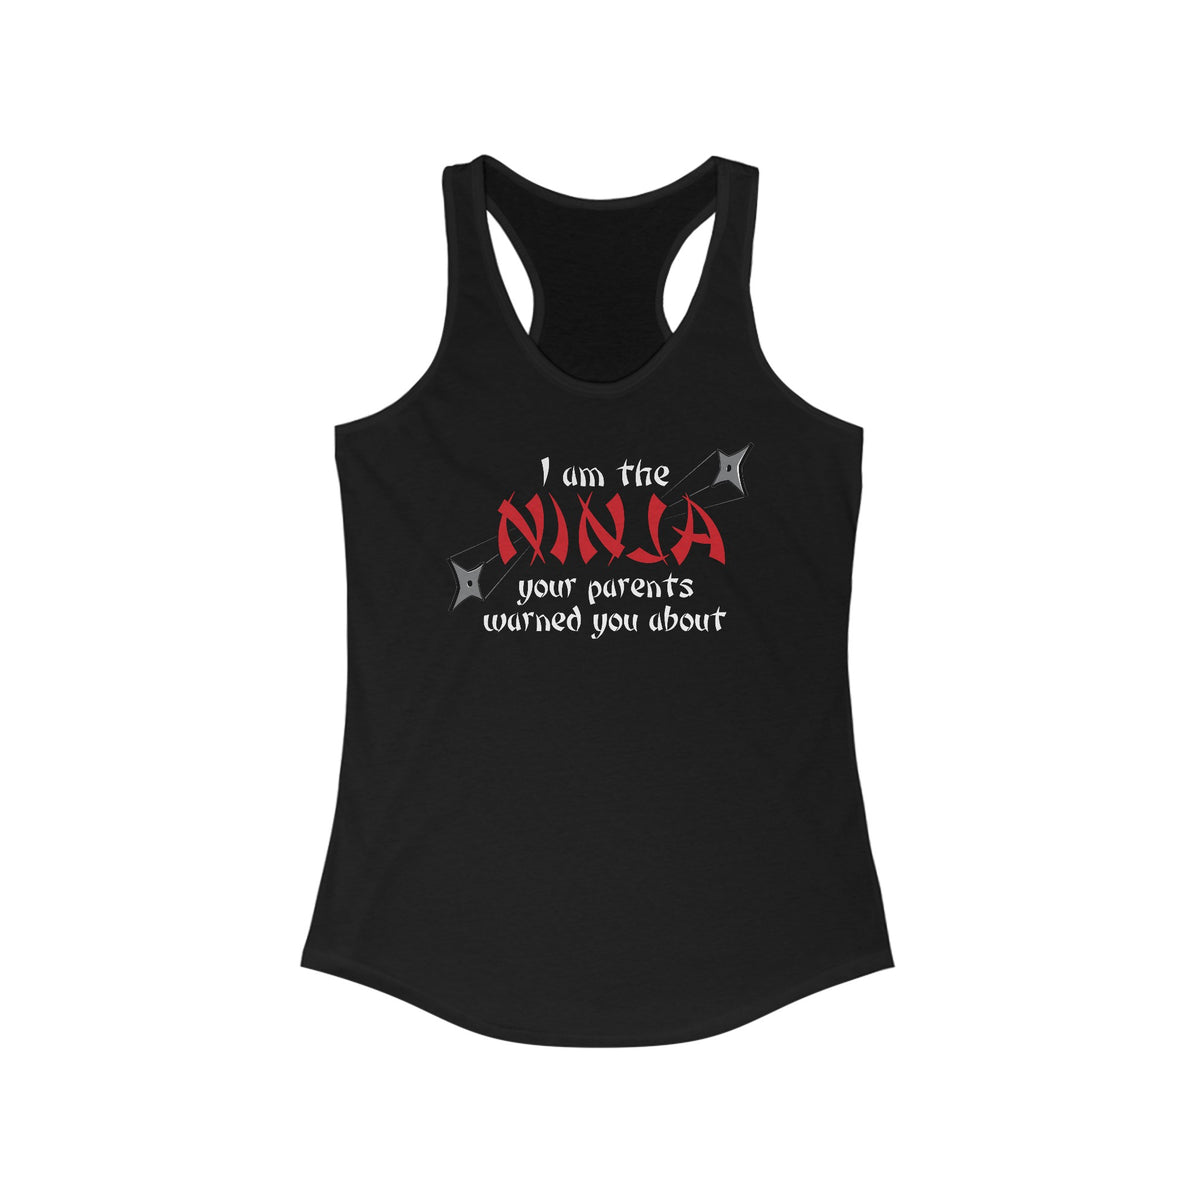 I Am The Ninja Your Parents Warned You About  - Women’s Racerback Tank